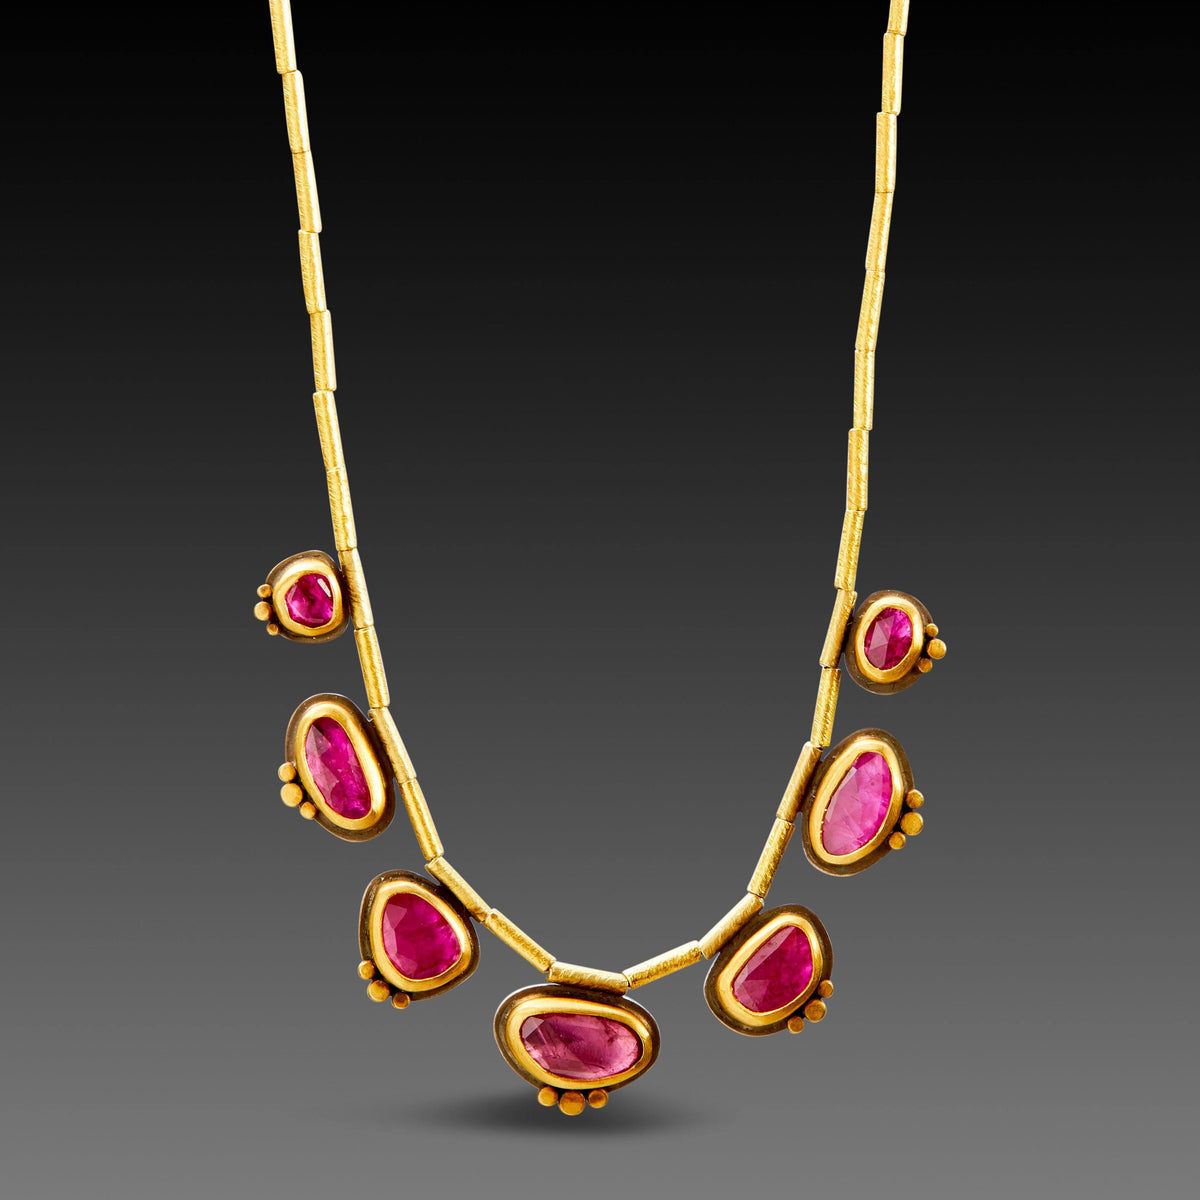 Gold, Ruby And Diamond Necklace Available For Immediate Sale At Sotheby's